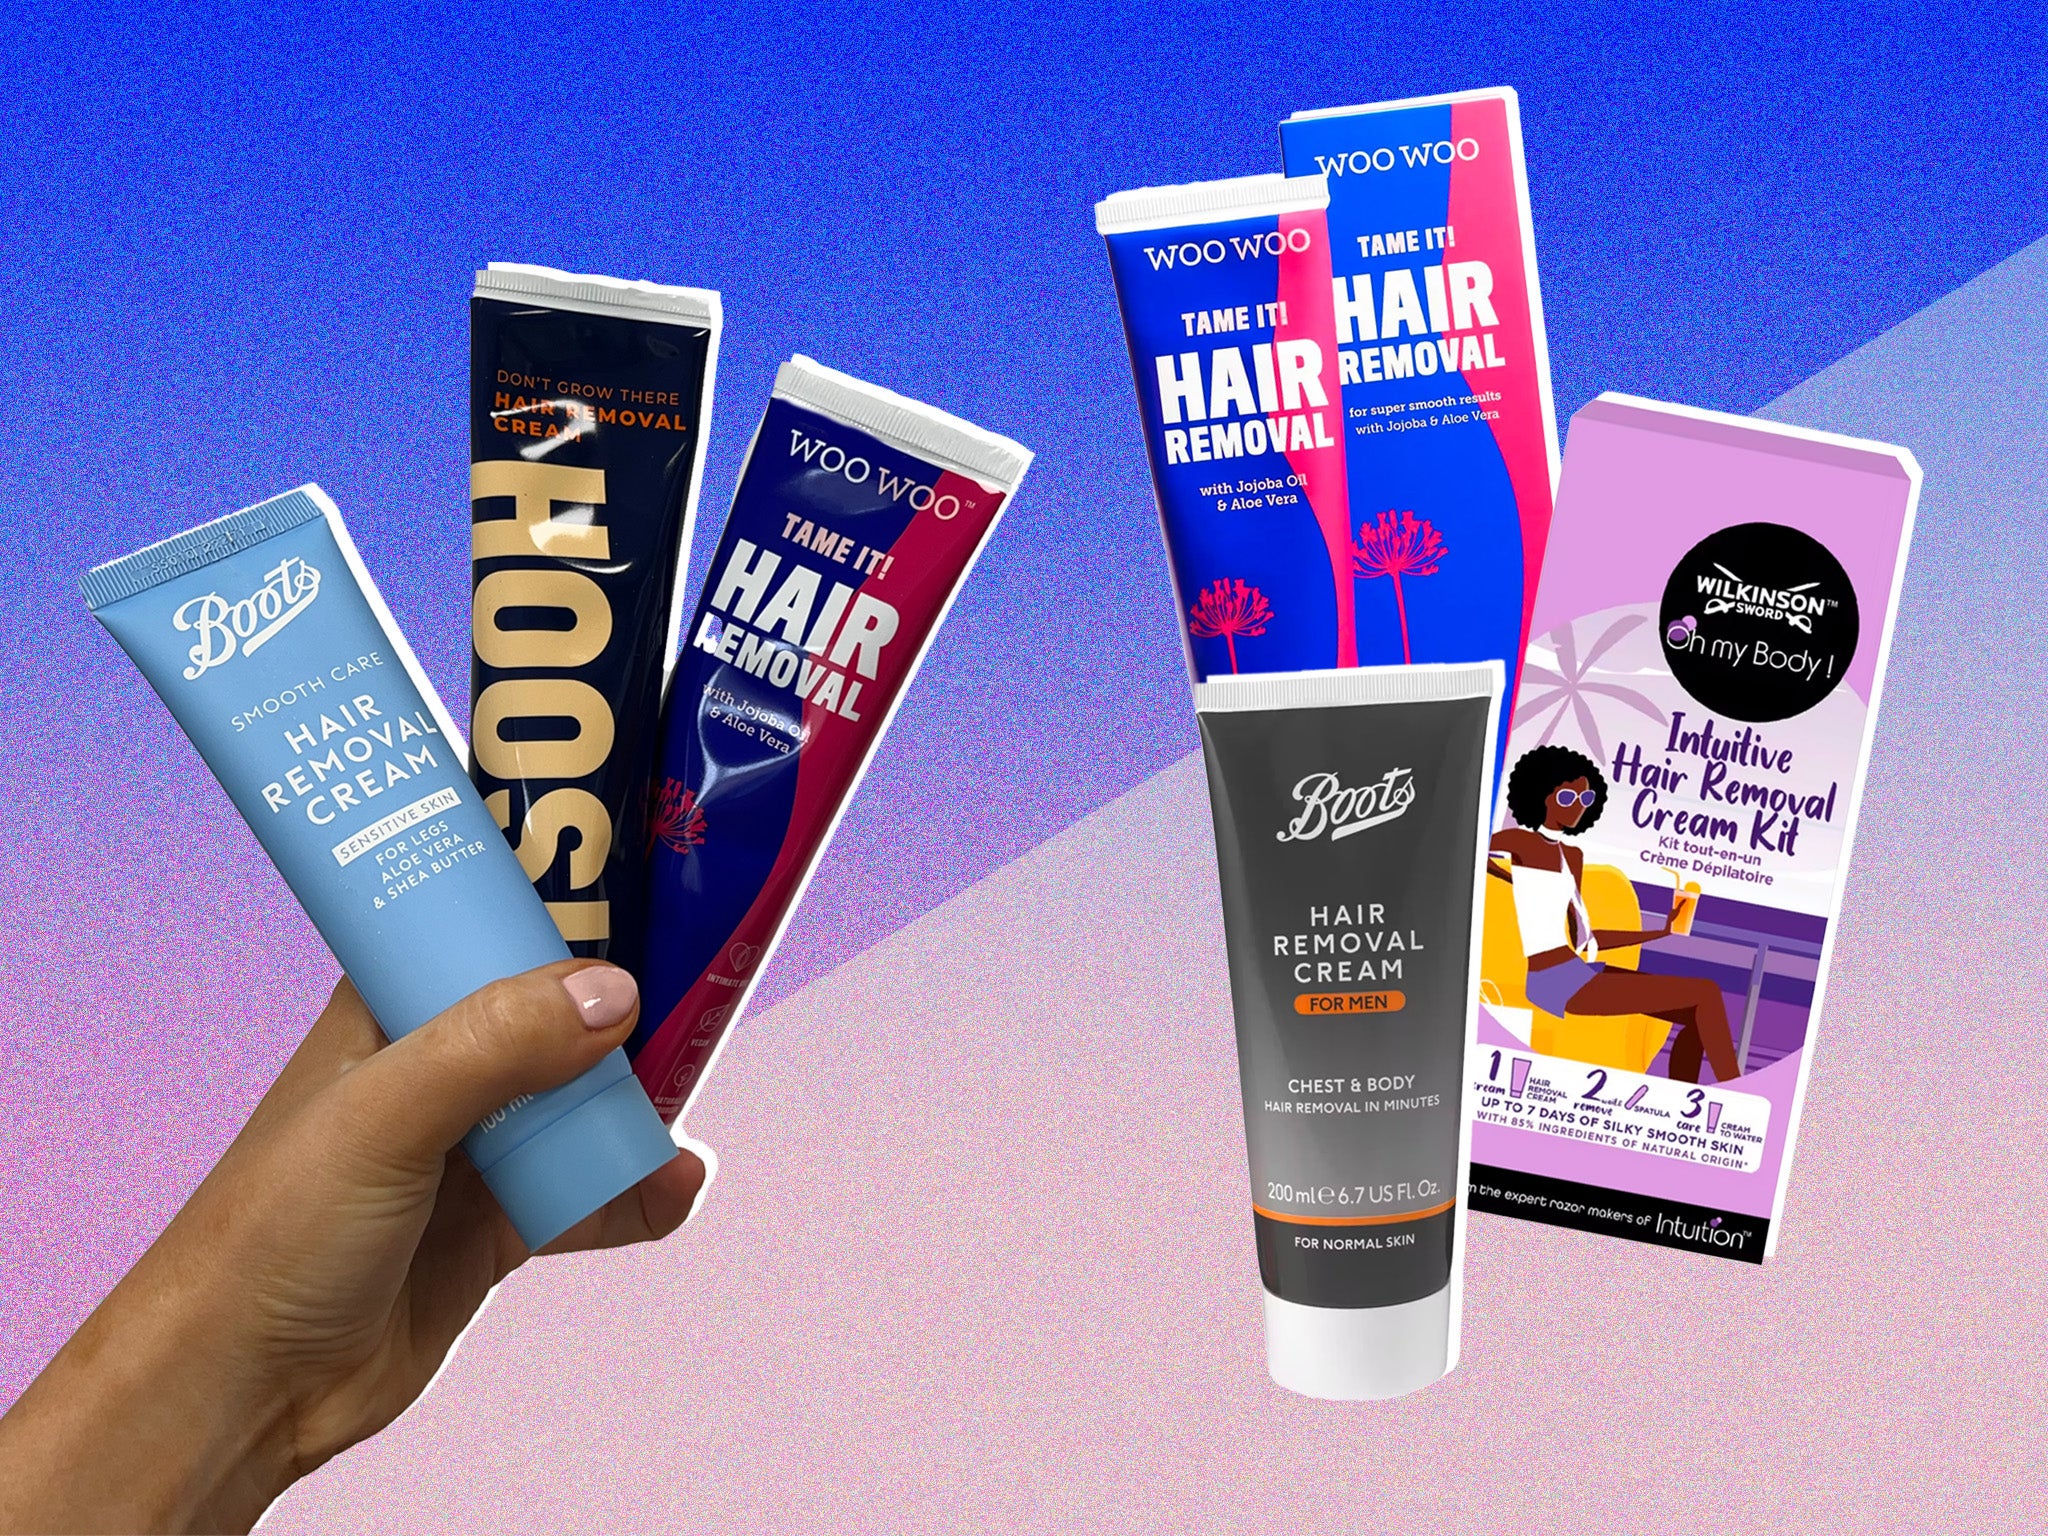 Hair Fact Kit (Male) - CosmoCare